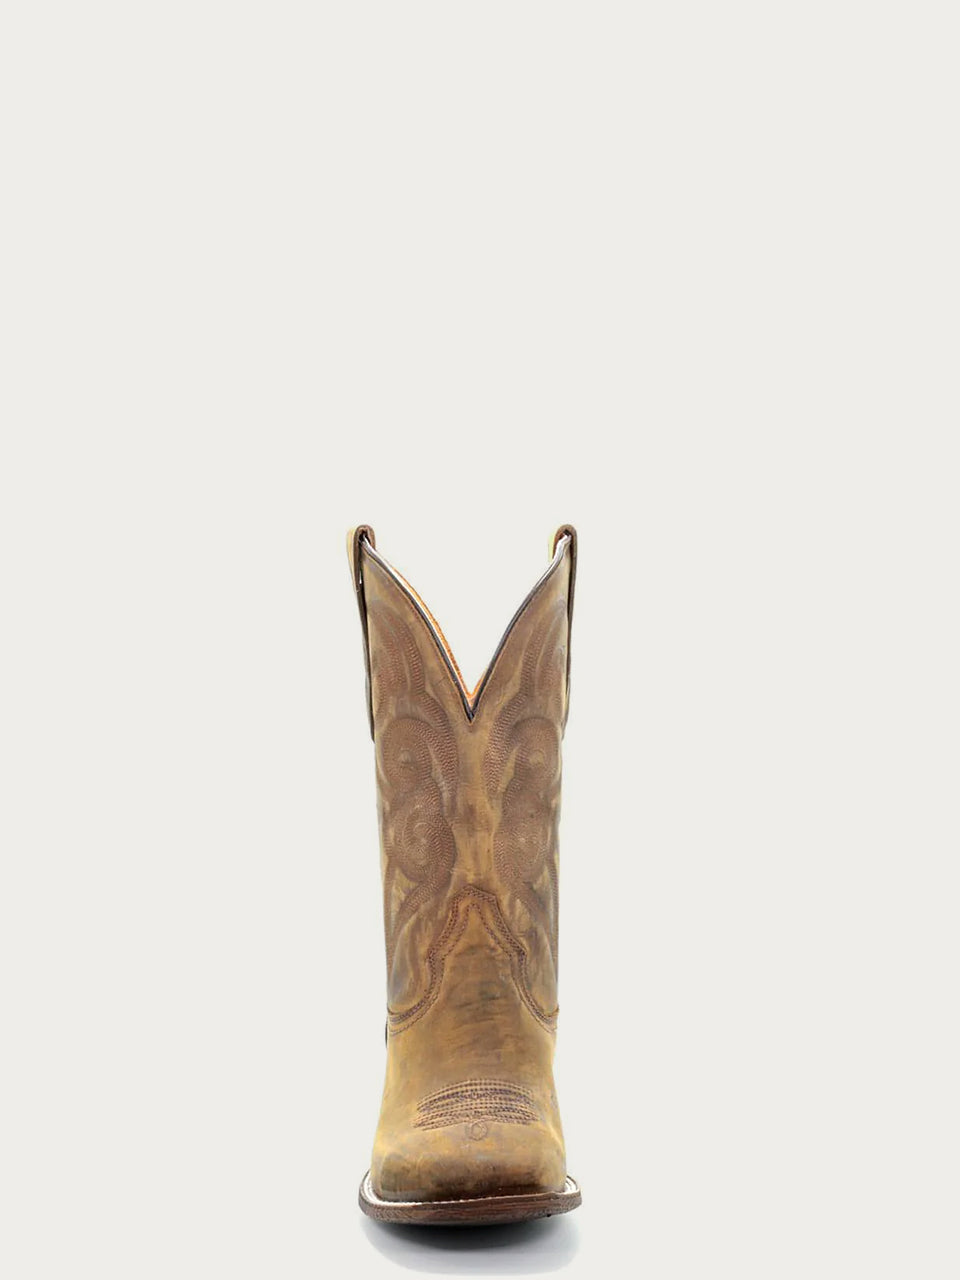 Cowboy boot Golden Embroidery Sq. Toe  leather is hand sanded and accented with a subtle yet distinct embroidery back view